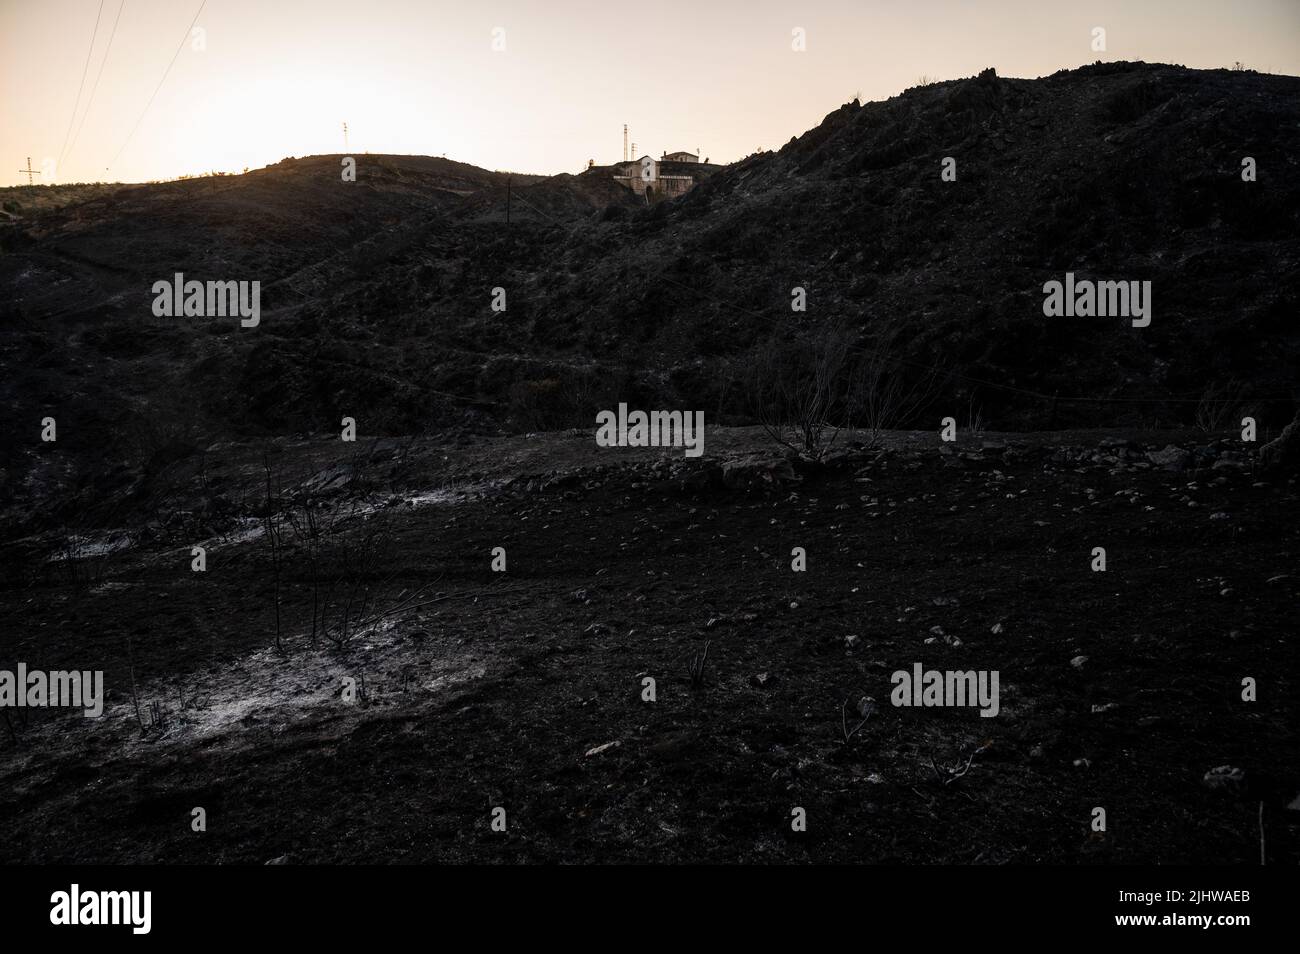 Guadalajara, Spain. 20th July, 2022. A building is seen among ashes near Valdepeñas de la Sierra, where a wildfire has burned more than 3,000 hectares. Wildfires have broken out across Spain amid a severe heatwave. Credit: Marcos del Mazo/Alamy Live News Stock Photo